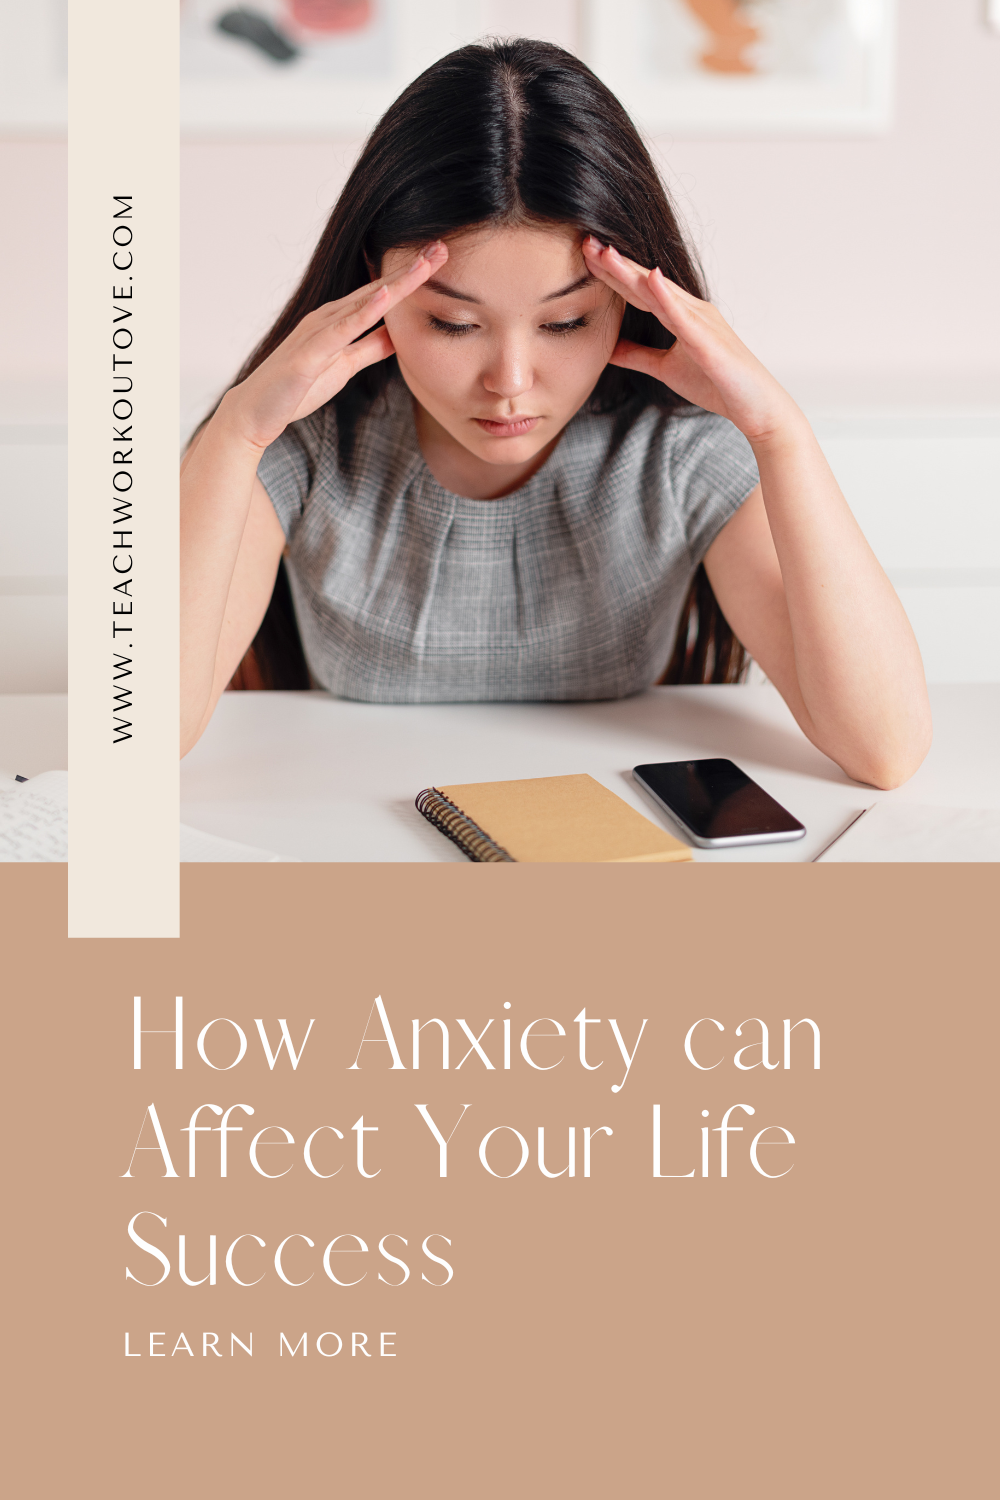 Some people find success in life very easily; they don’t have any anxiety issues and get along well with people; the story is different for people with anxiety. This fear can lead to shyness and disinterest, which affects someone's overall quality of life. But there are solutions to anxiety. 